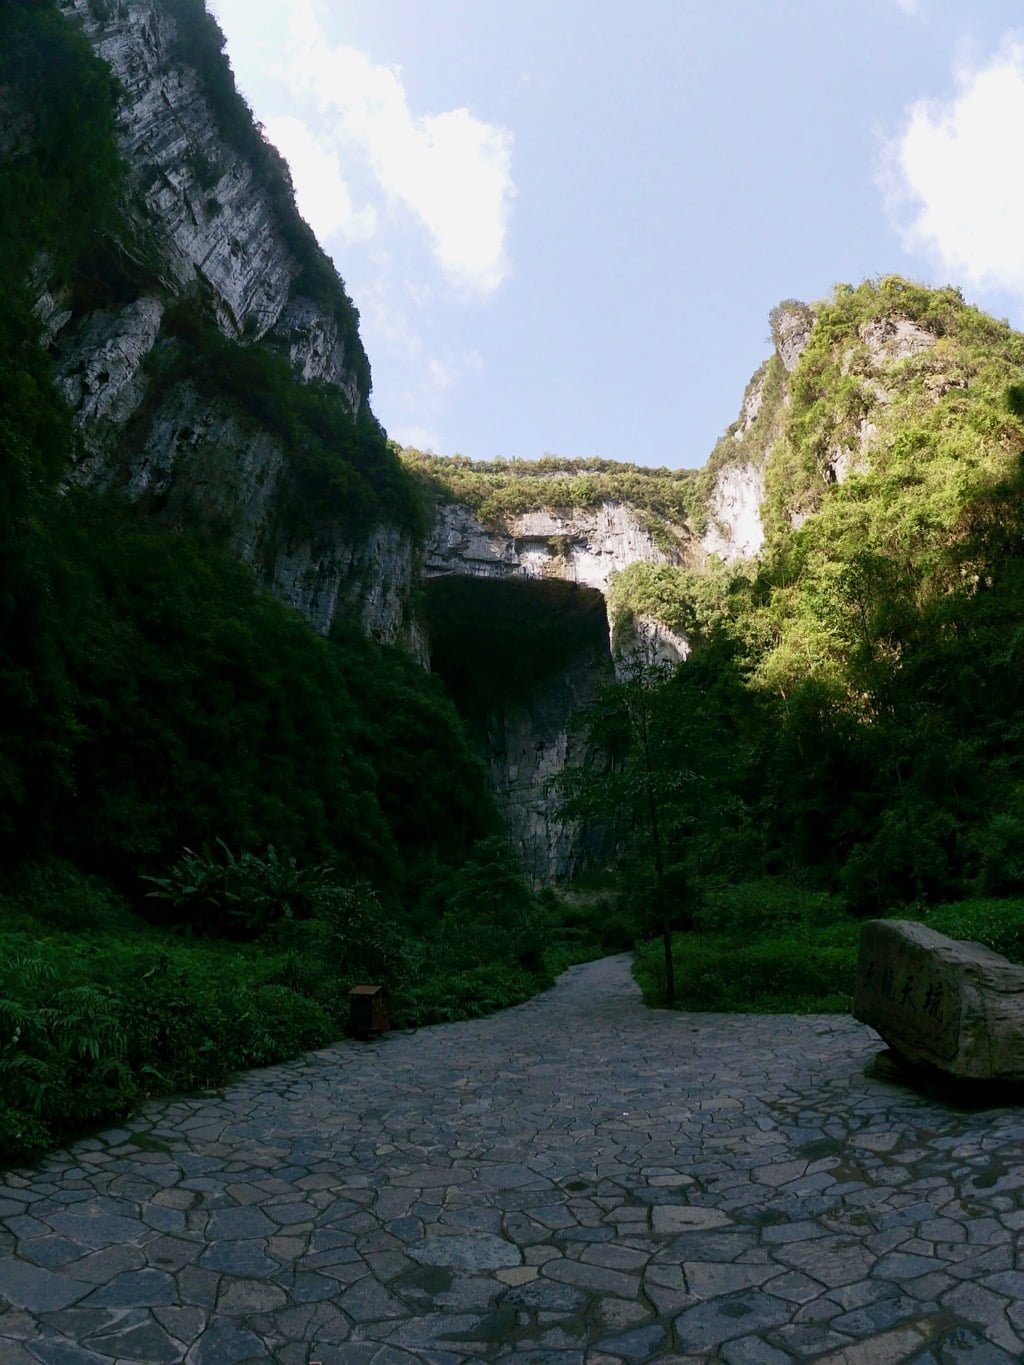 Three Natural Bridges in Wulong, Chongqing, China: natural limestone bridges featuring a well-maintained pathway